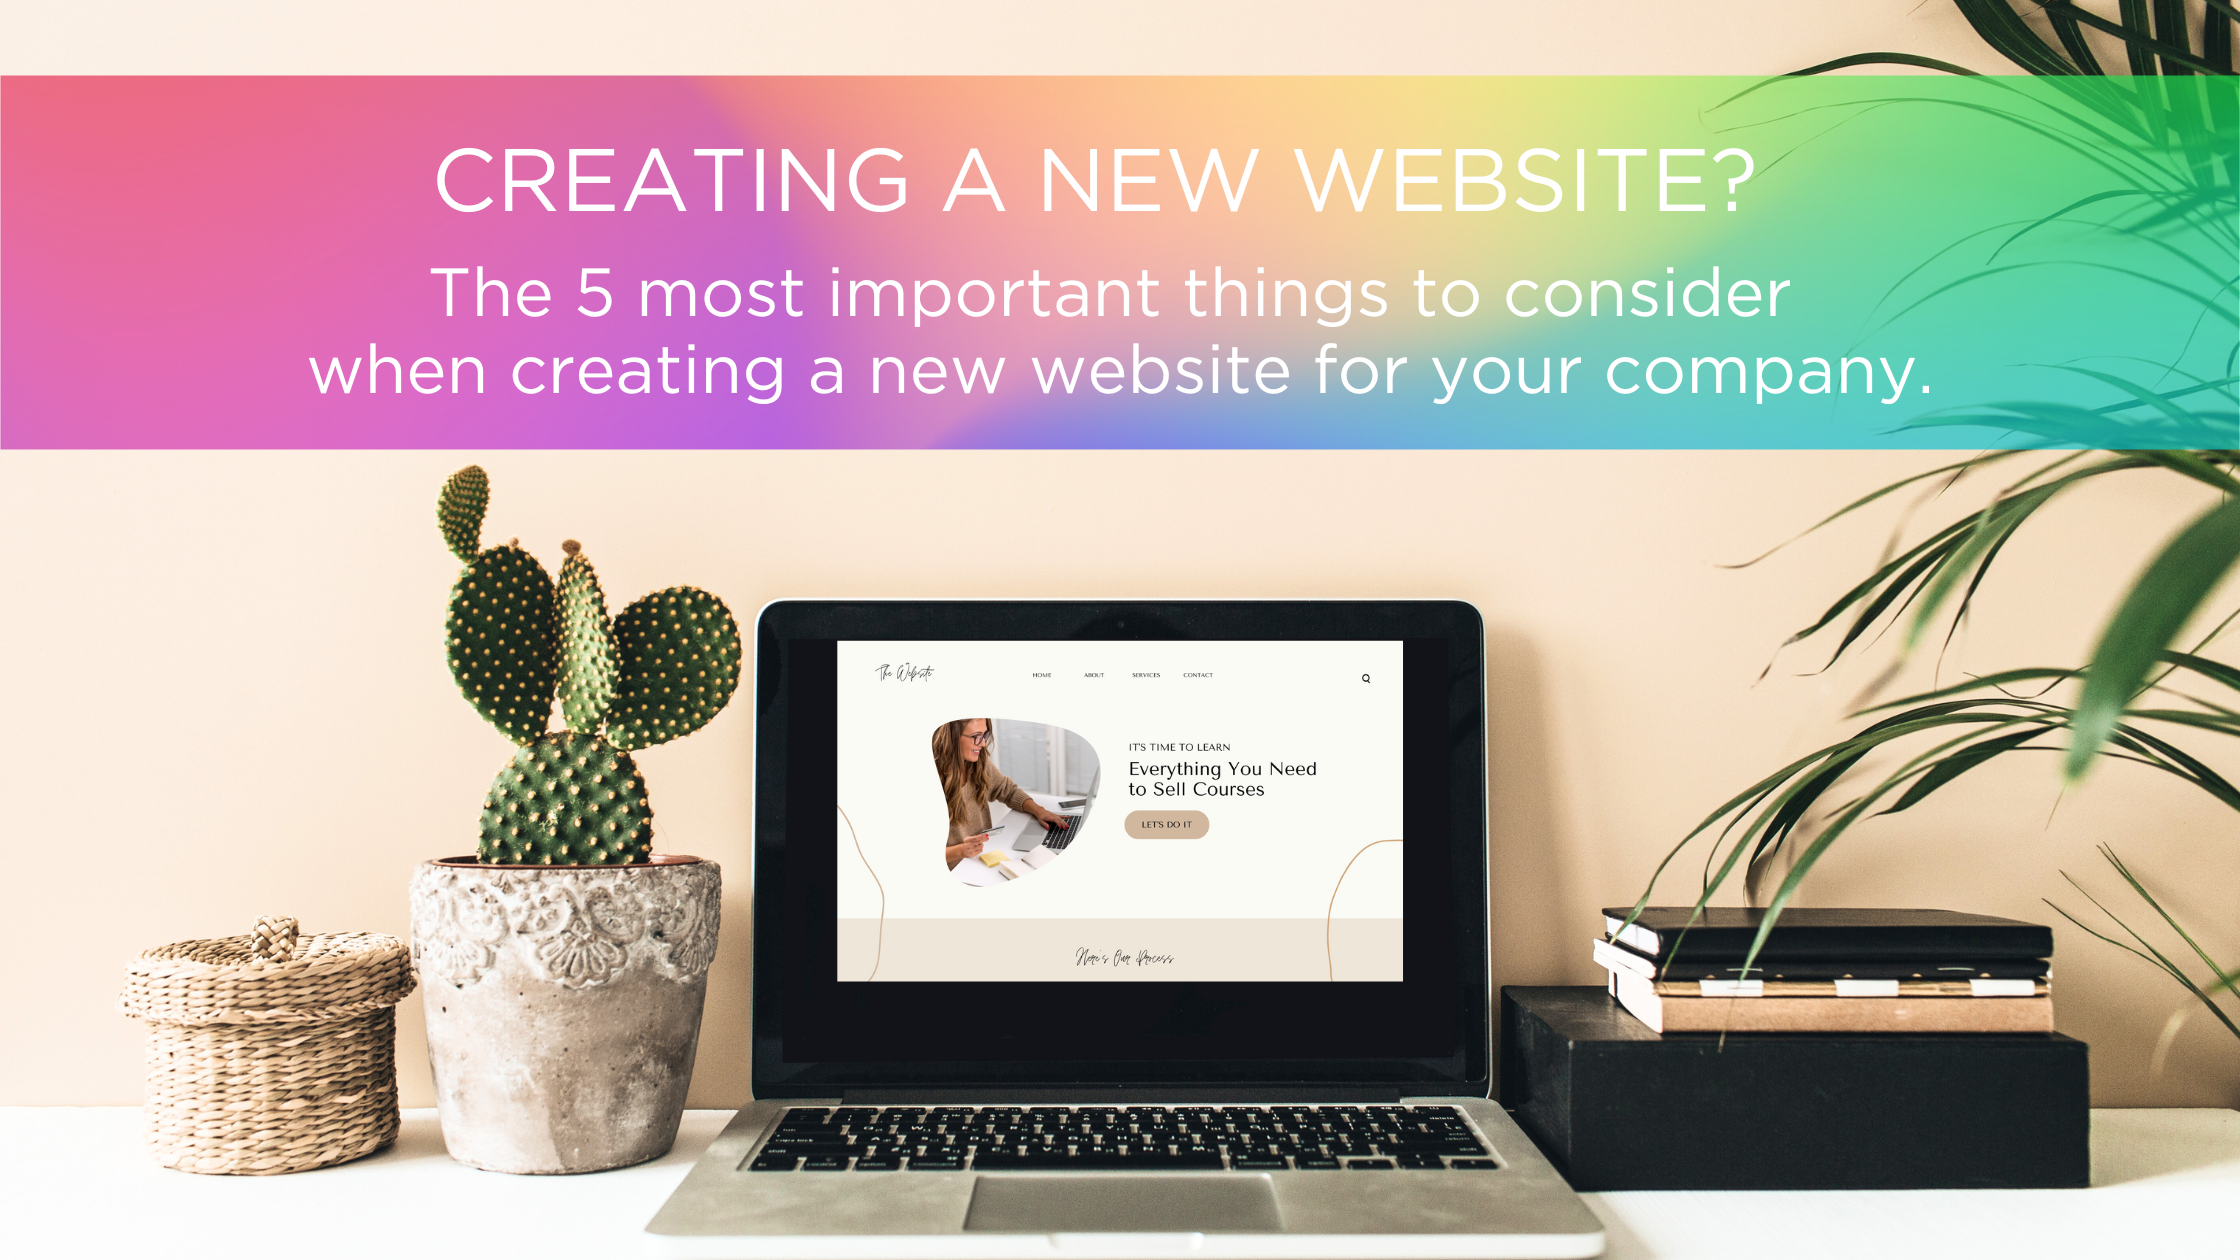 CREATING A NEW WEBSITE